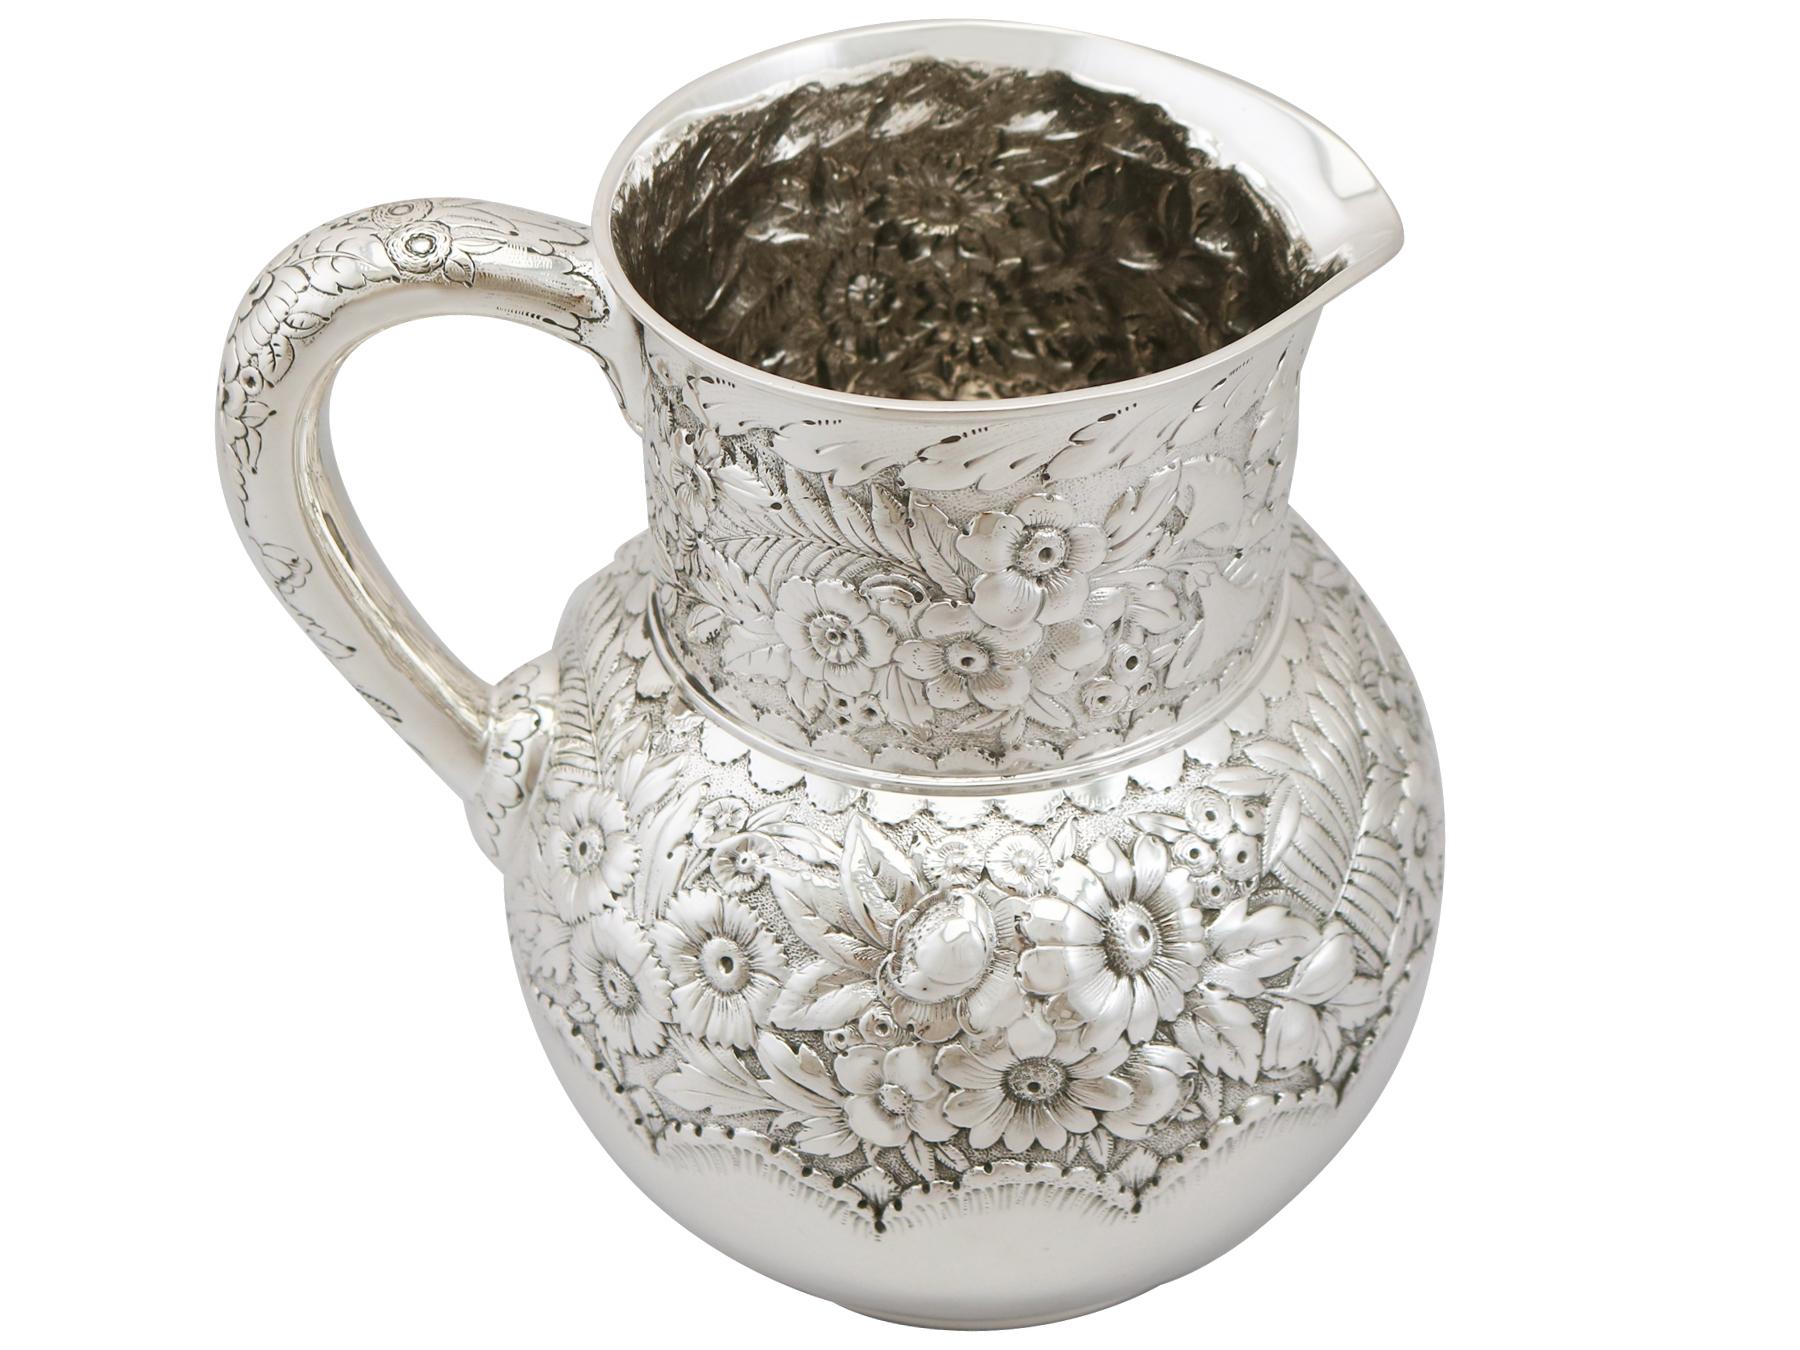 Late 19th Century 1877 Antique American Sterling Silver Water Pitcher Jug by Tiffany & Co.